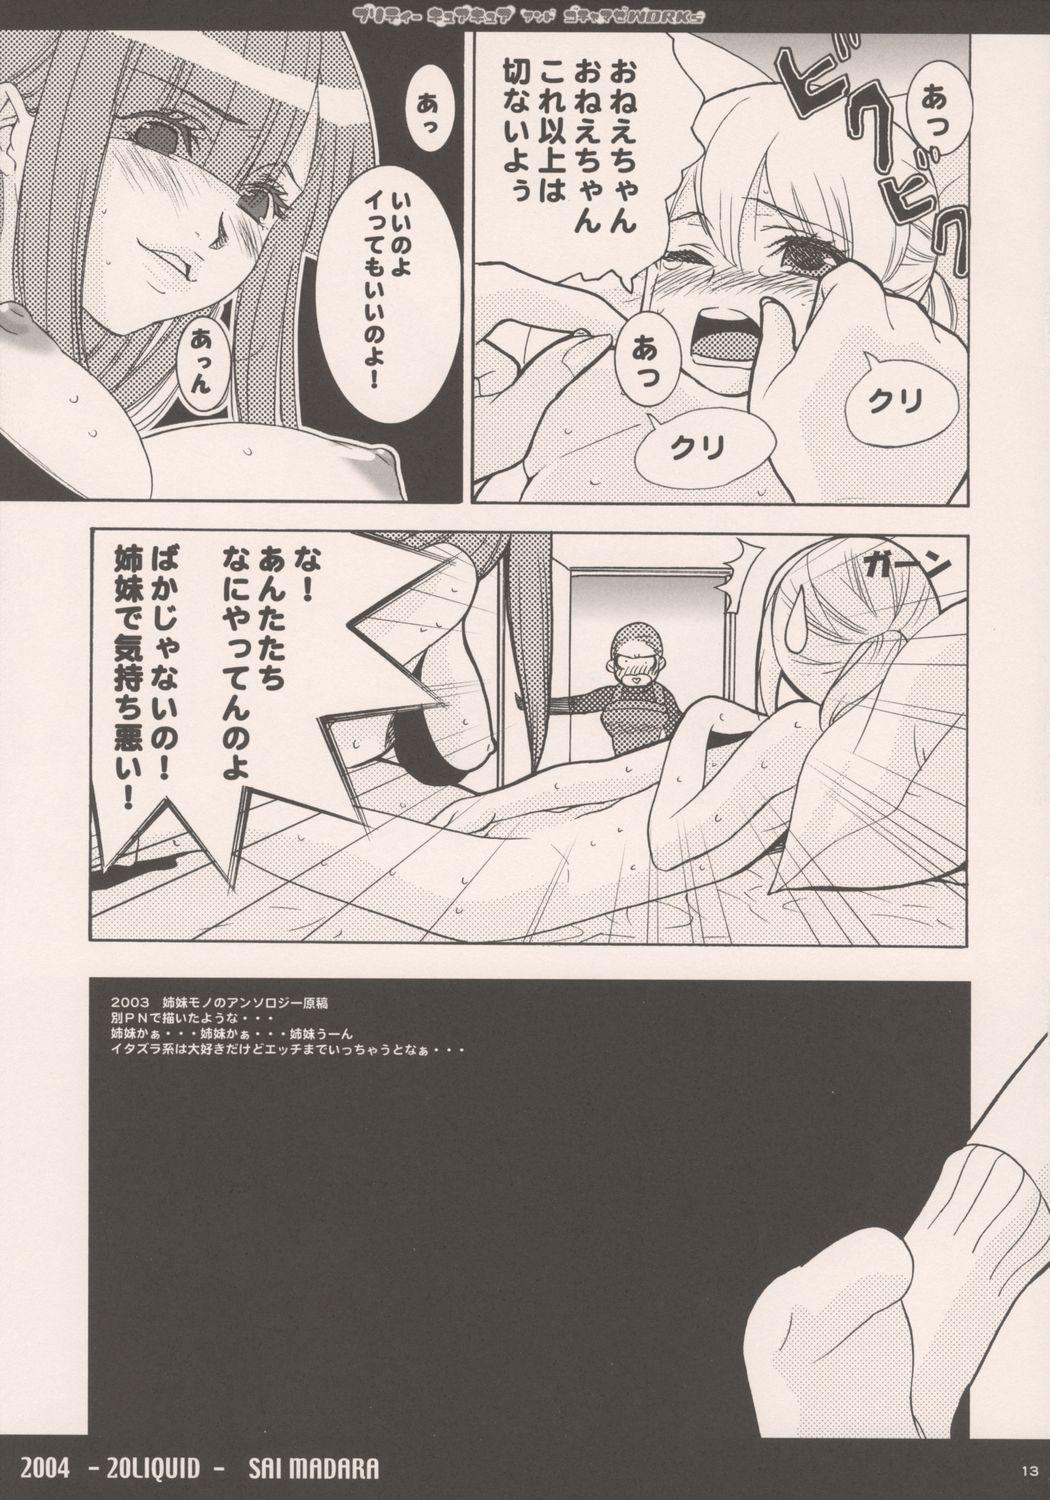 Babe Pretty CureCure And Gochamaze Works - Pretty cure Body Massage - Page 12